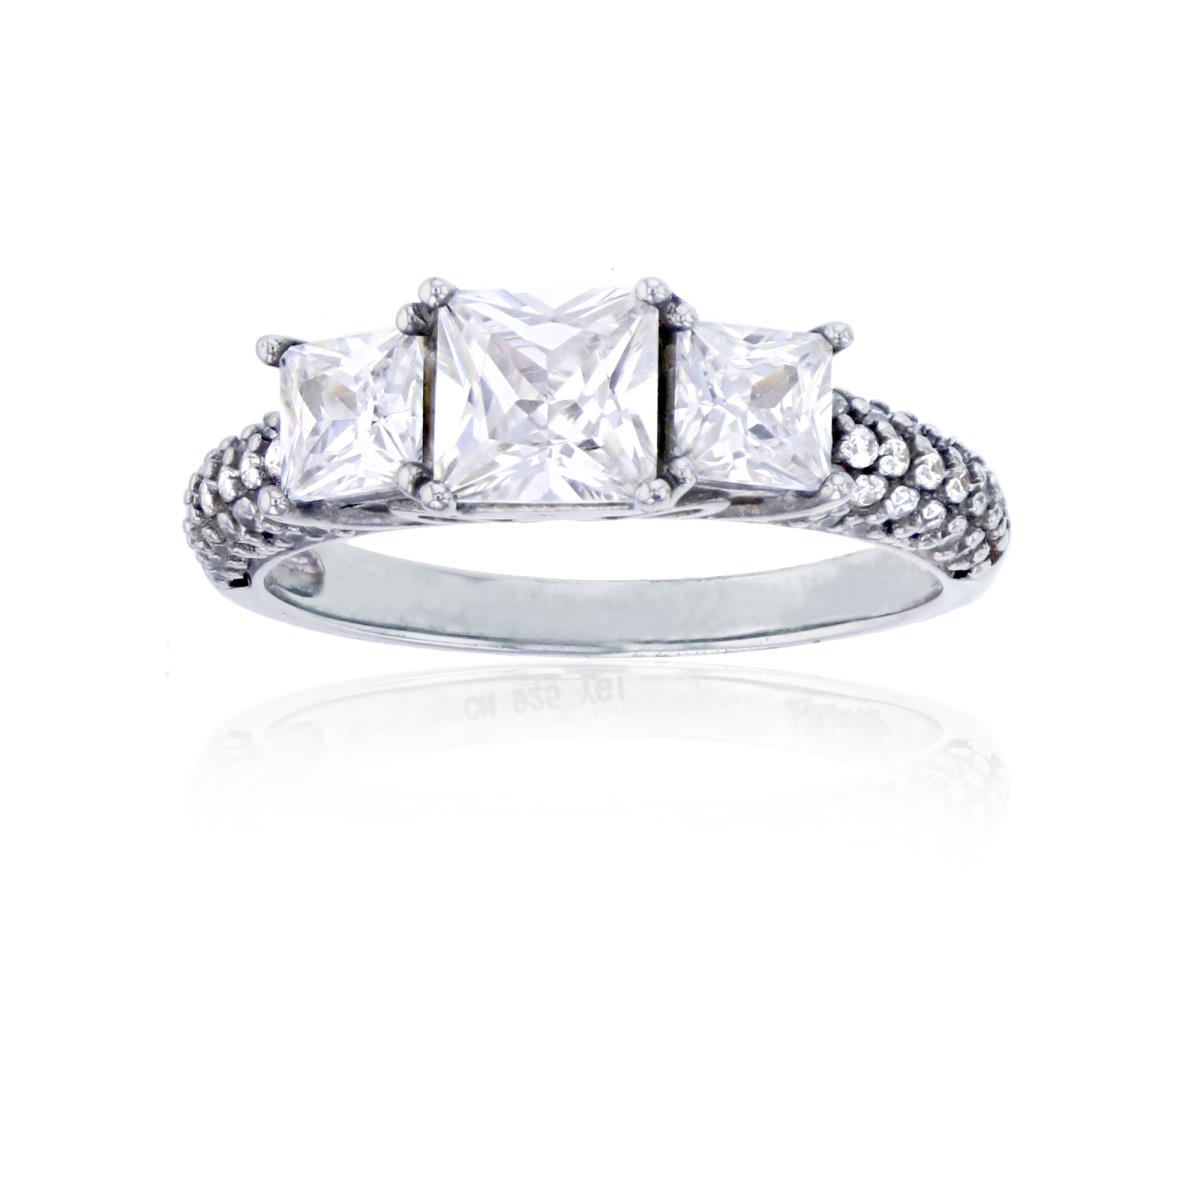 Sterling Silver 5.5mm Princess Cut 3 Stone Pave Eng Ring w/ 4x4mm Princess Cut Side Stones